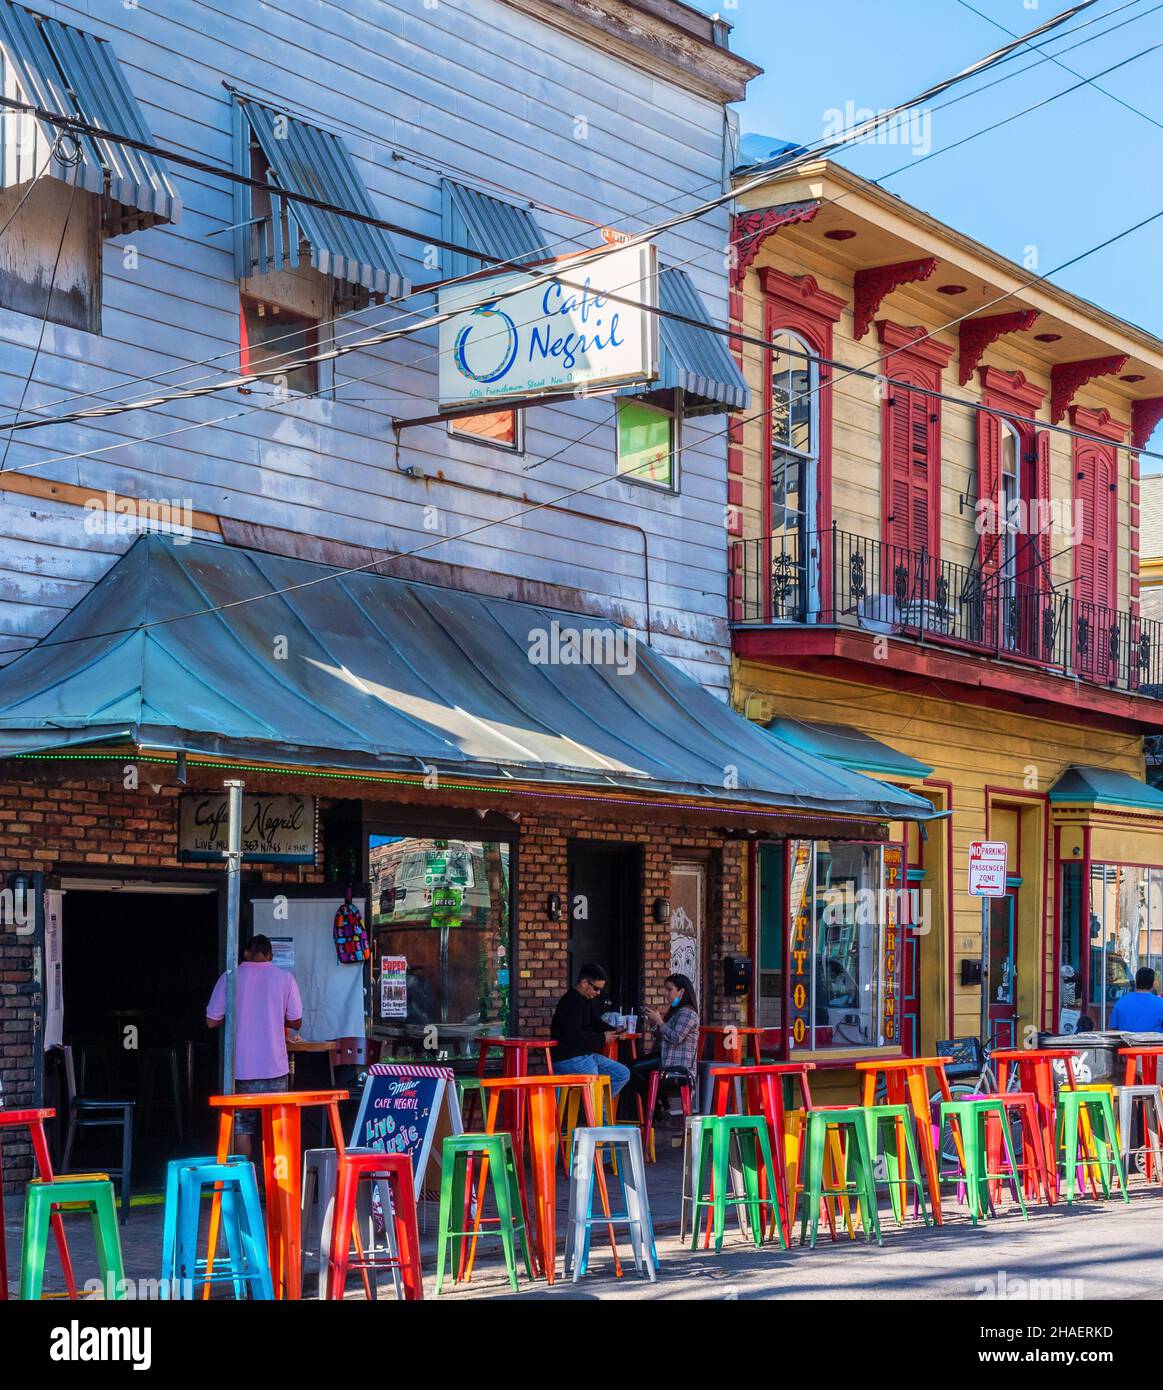 Cafe Negril colorful live music venue on Frenchmen Street in the Faubourg Marigny neighborhood of New Orleans, Louisiana, USA. Stock Photo